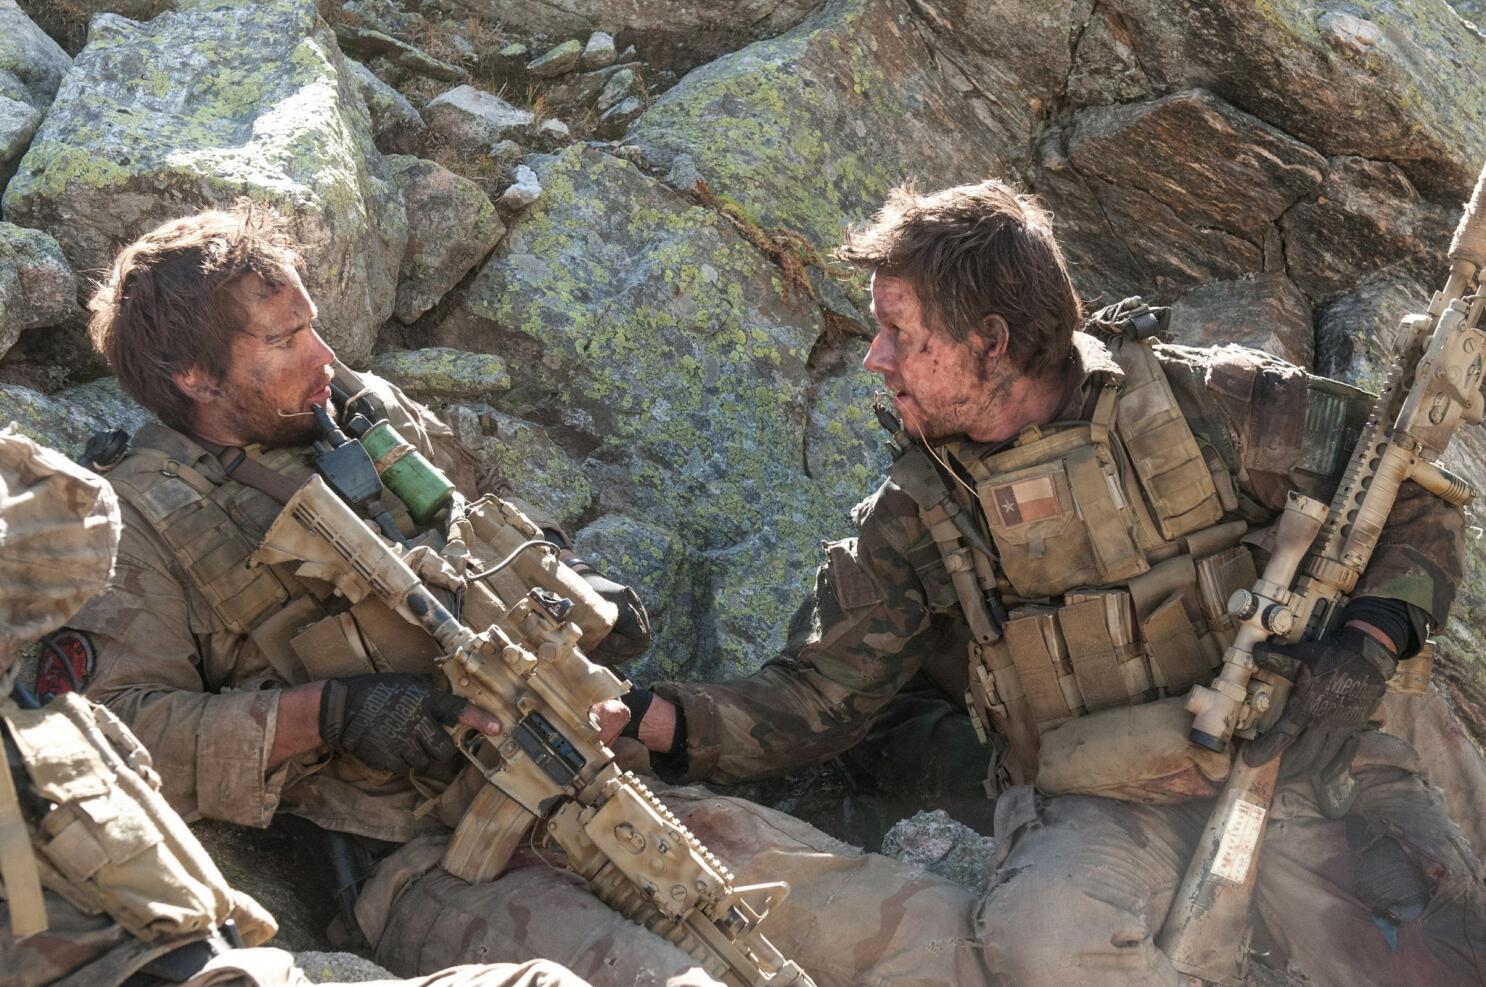 How 'American Sniper' and 'Lone Survivor' Revived the War Movie